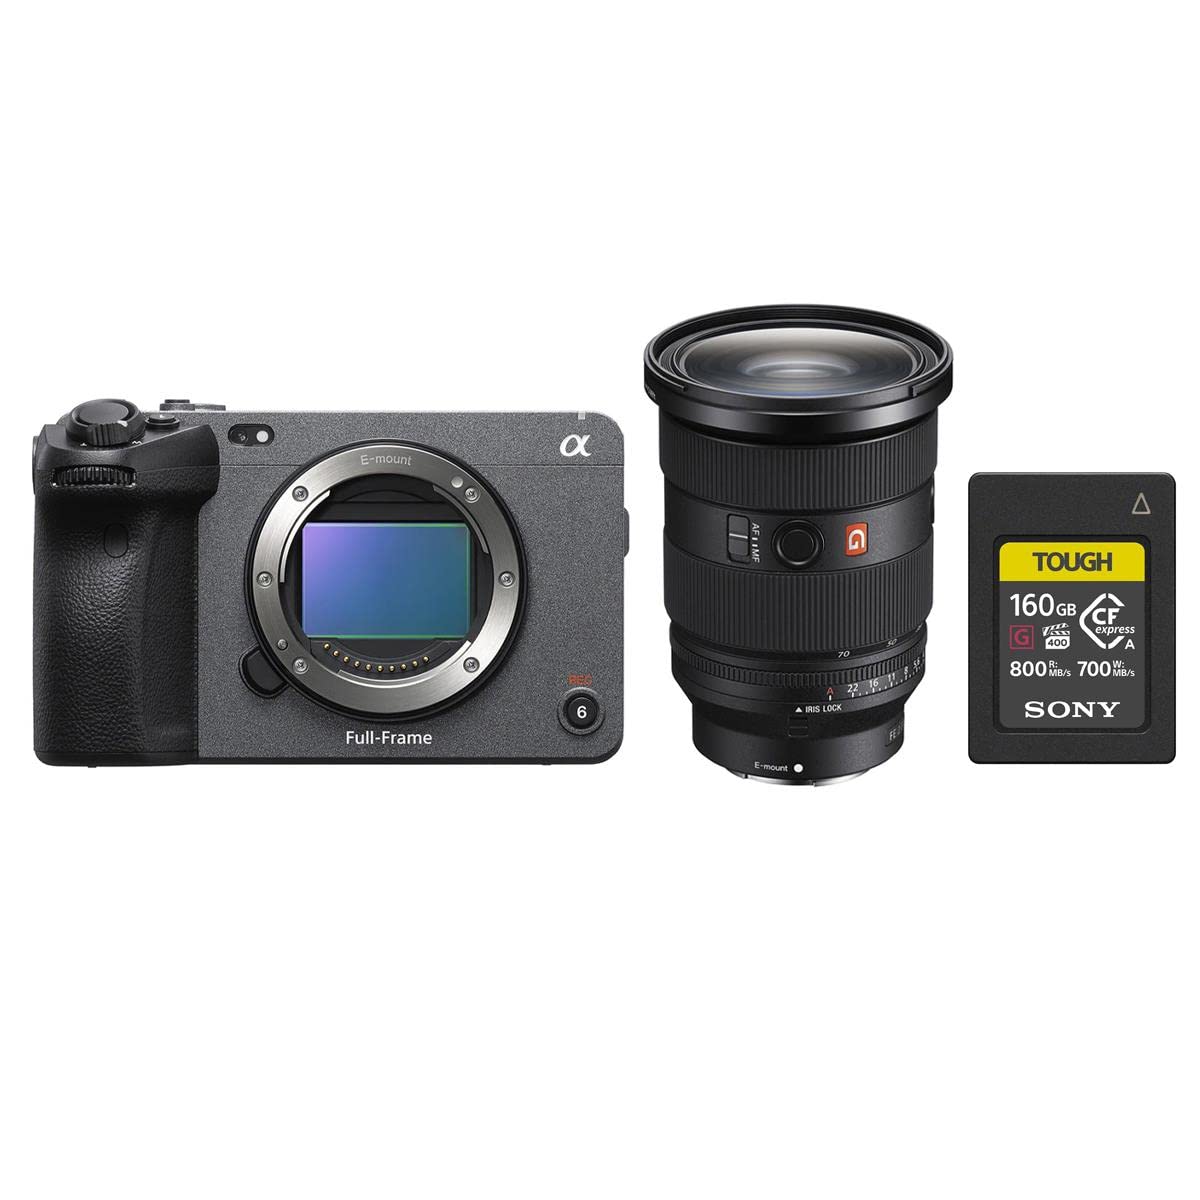 Sony FX3 Full-Frame Cinema Line Camera with Sony FE 24-70mm f/2.8 GM II Lens, Bundled with, Sony Tough 160GB CFexpress Type A Memory Card for Digital Video (3 Items)